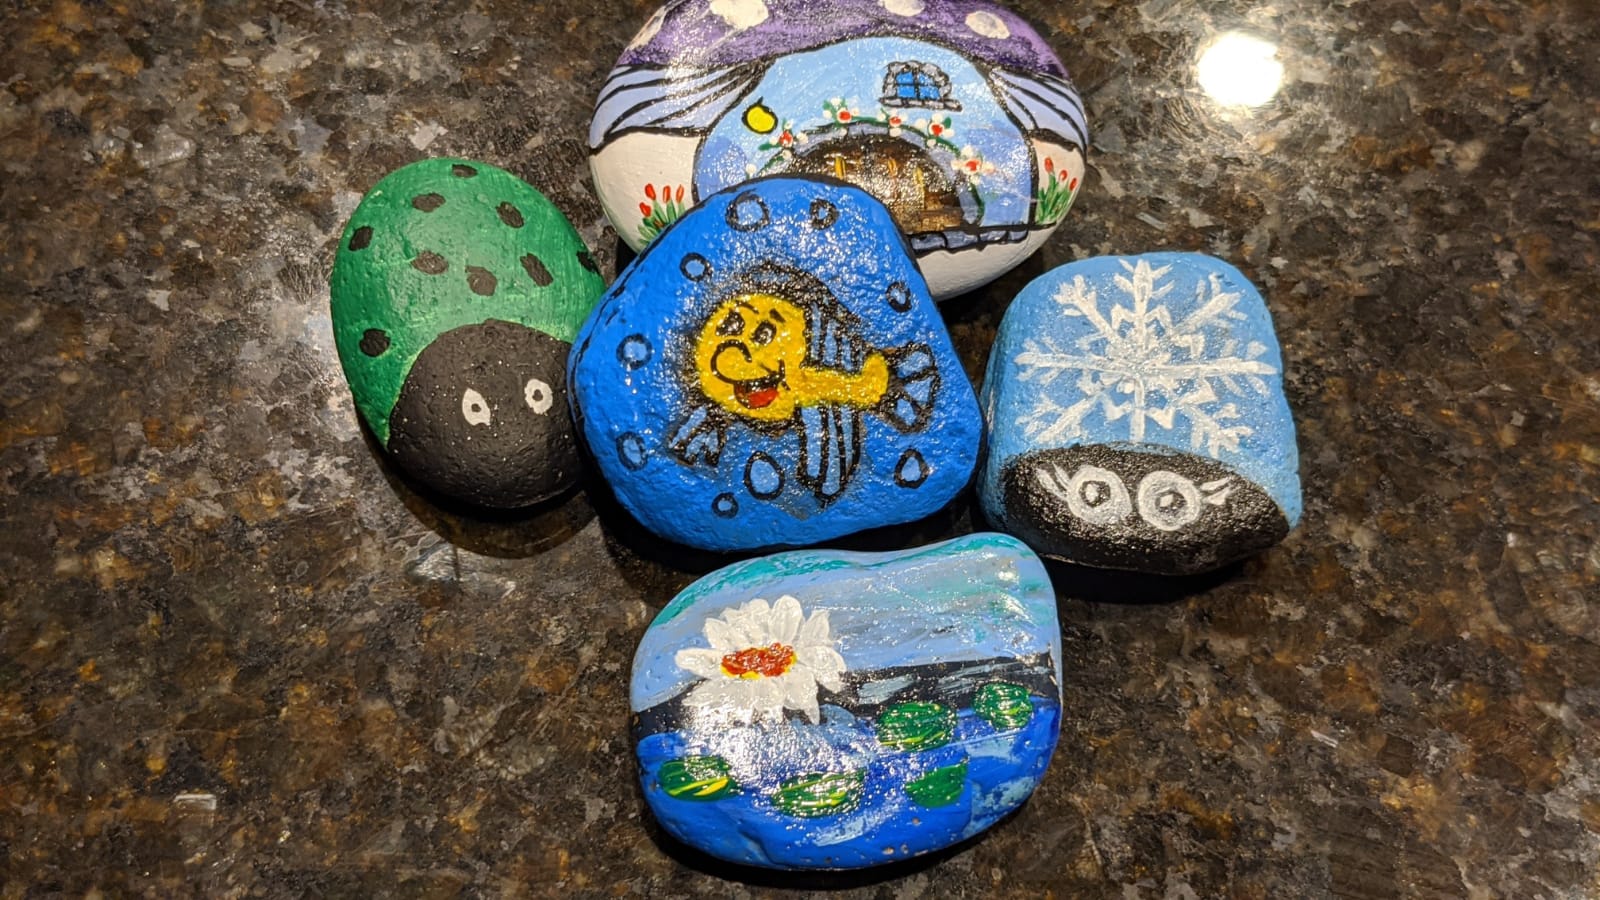 Find the Happiness on Stones!